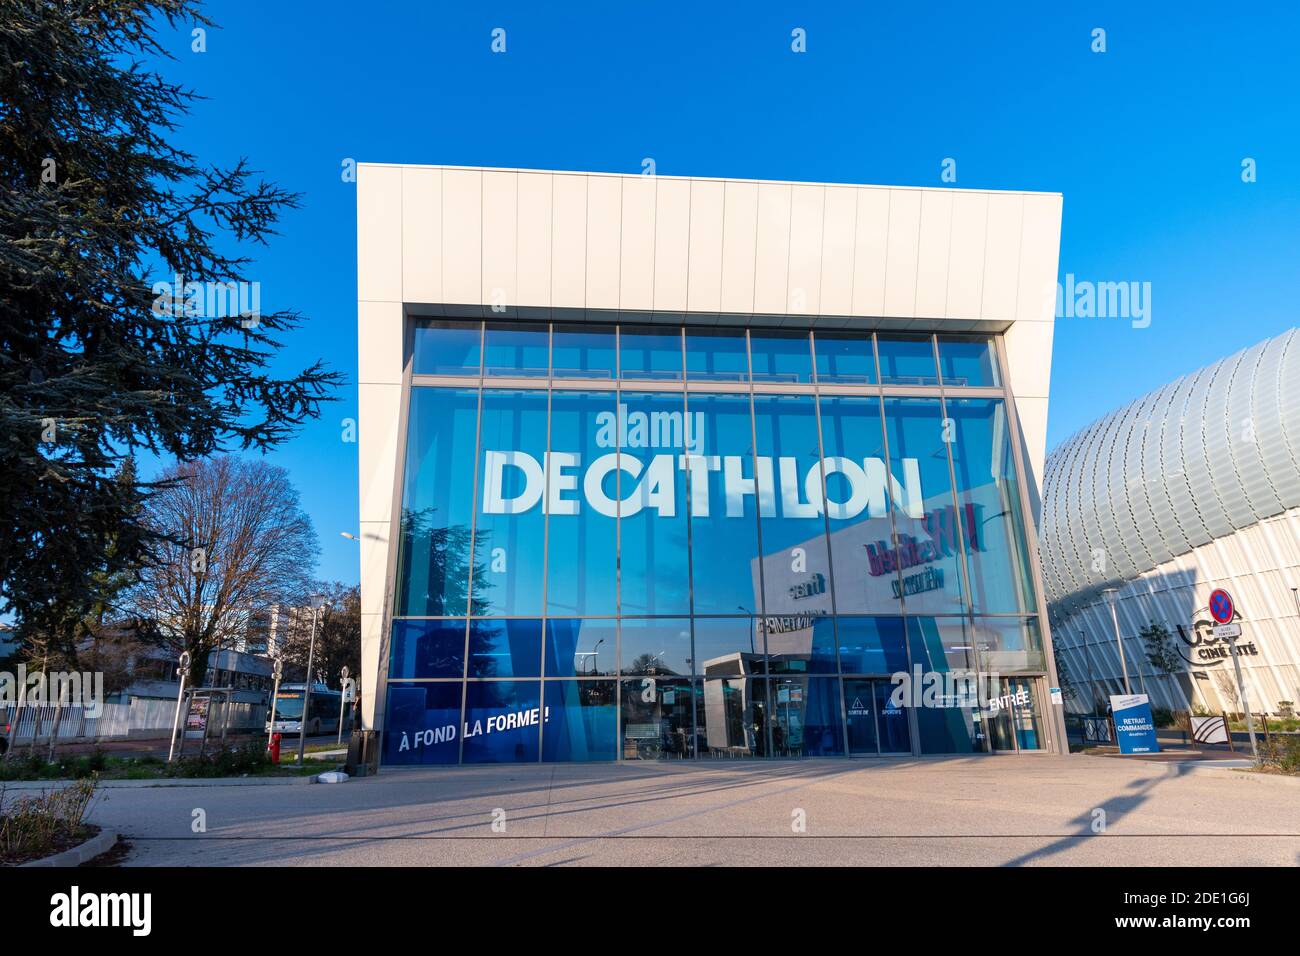 Vélizy-Villacoublay, France - November 27, 2020: Exterior view of a  Decathlon store. Decathlon is the world largest sporting good retailer  Stock Photo - Alamy